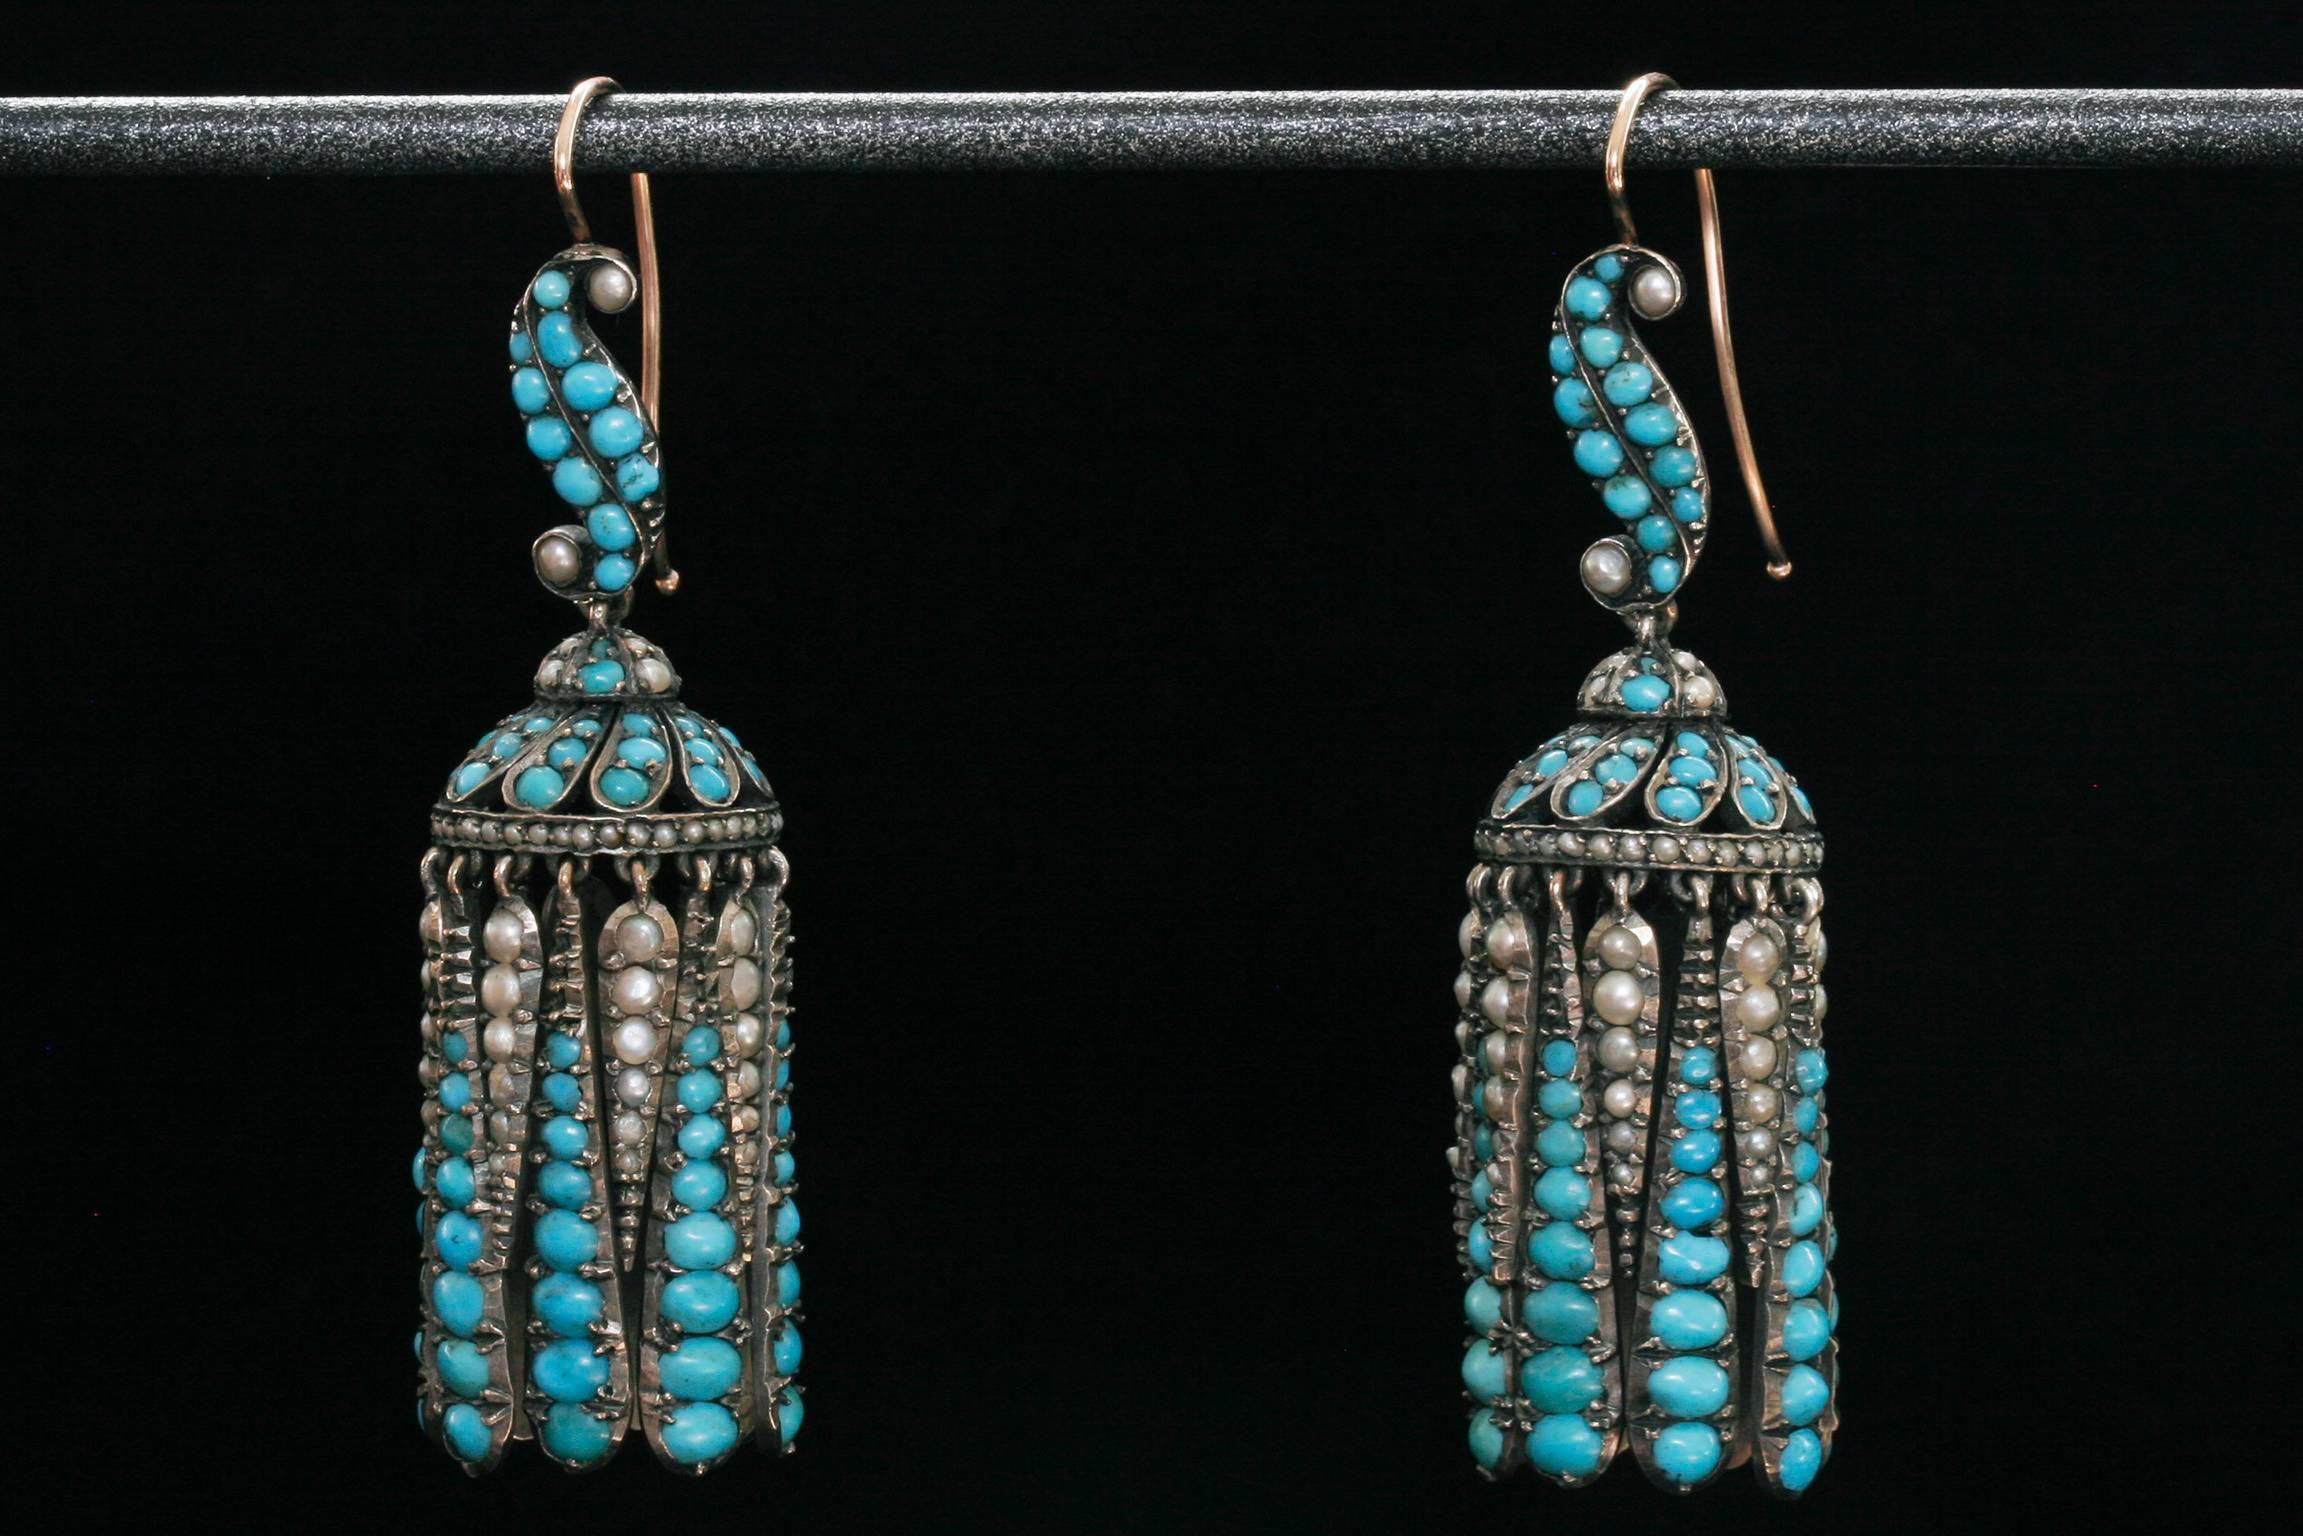 C.1860.  A spectacular pair of Victorian turquoises and pearls fringe earrings set in silver with 15k ear wires. Each dagger shape fringe drop of turquoises and pearls forms a moving pagoda. The top is accentuated with a curved S shape that is